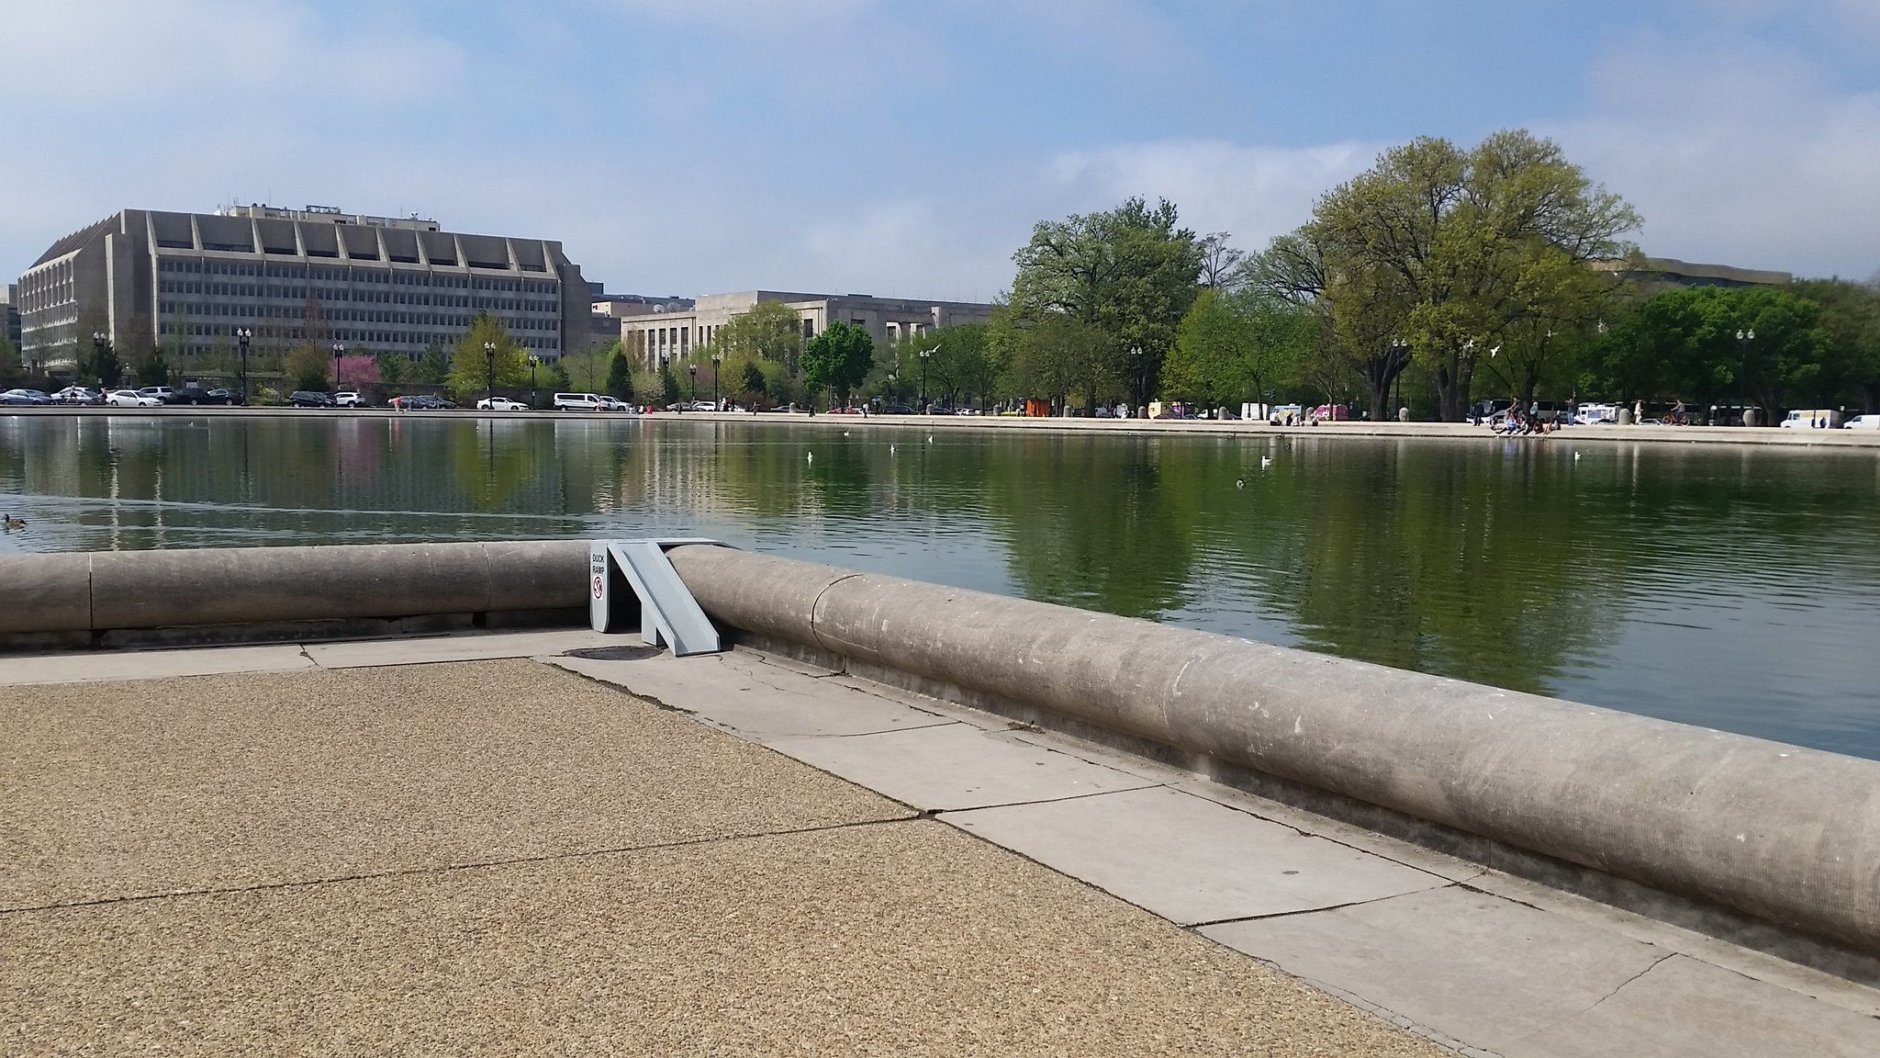 During the spring and summer, the Reflecting Pool sees around 20-35 families of ducks, according to April Linton, who heads up the duck program with City Wildlife. (WTOP/Kathy Stewart)